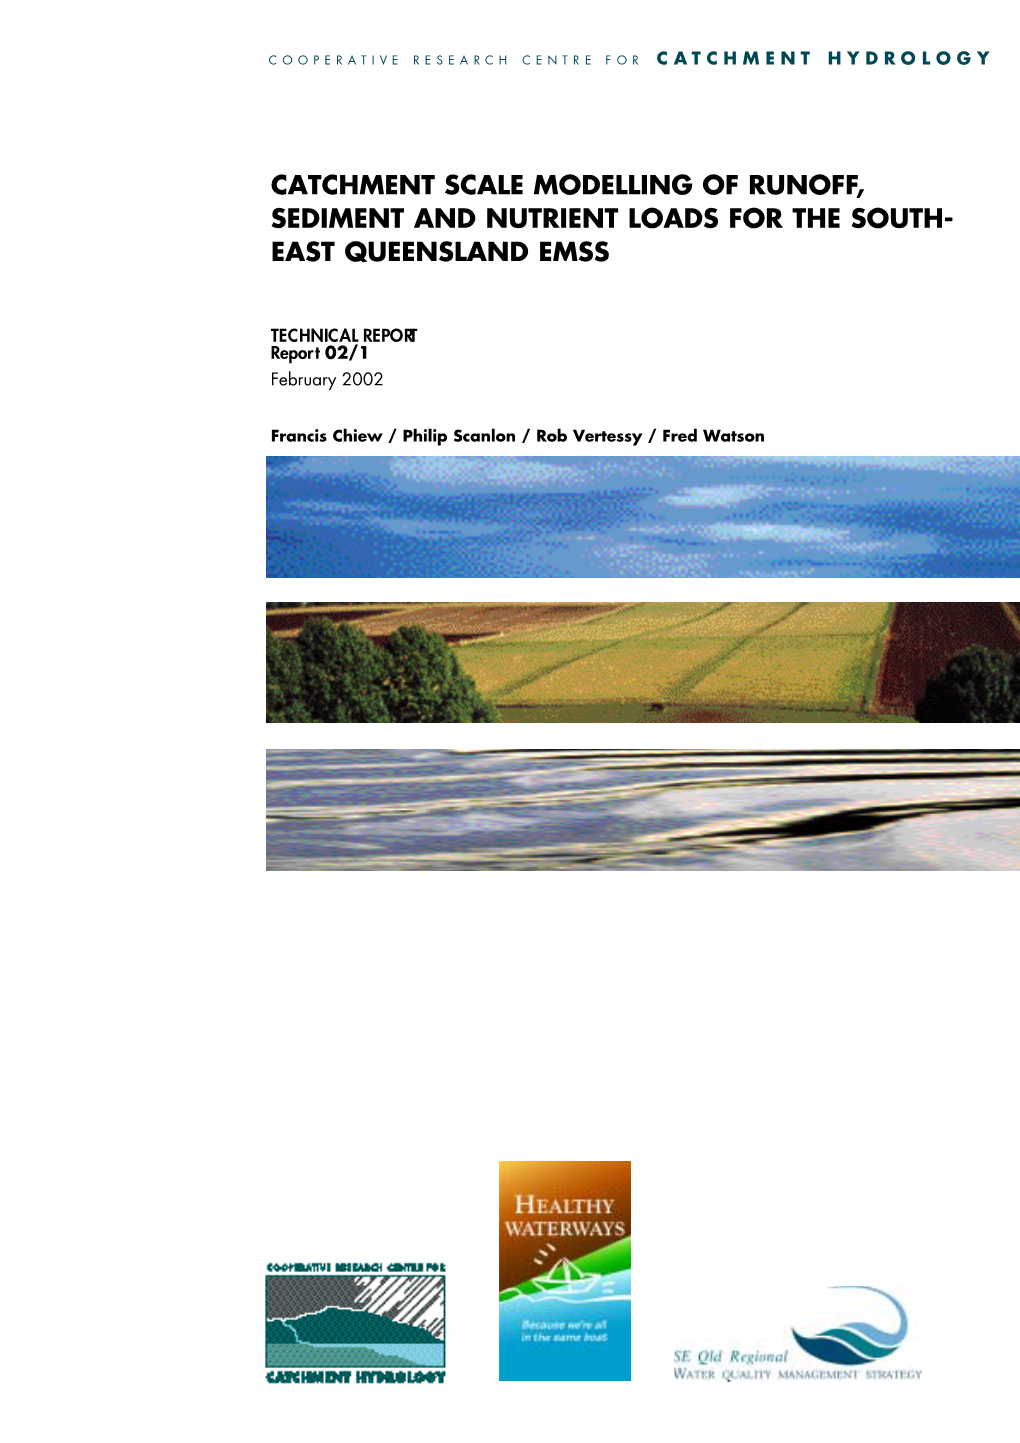 Catchment Scale Modelling of Runoff, Sediment and Nutrient Loads for the South- East Queensland Emss